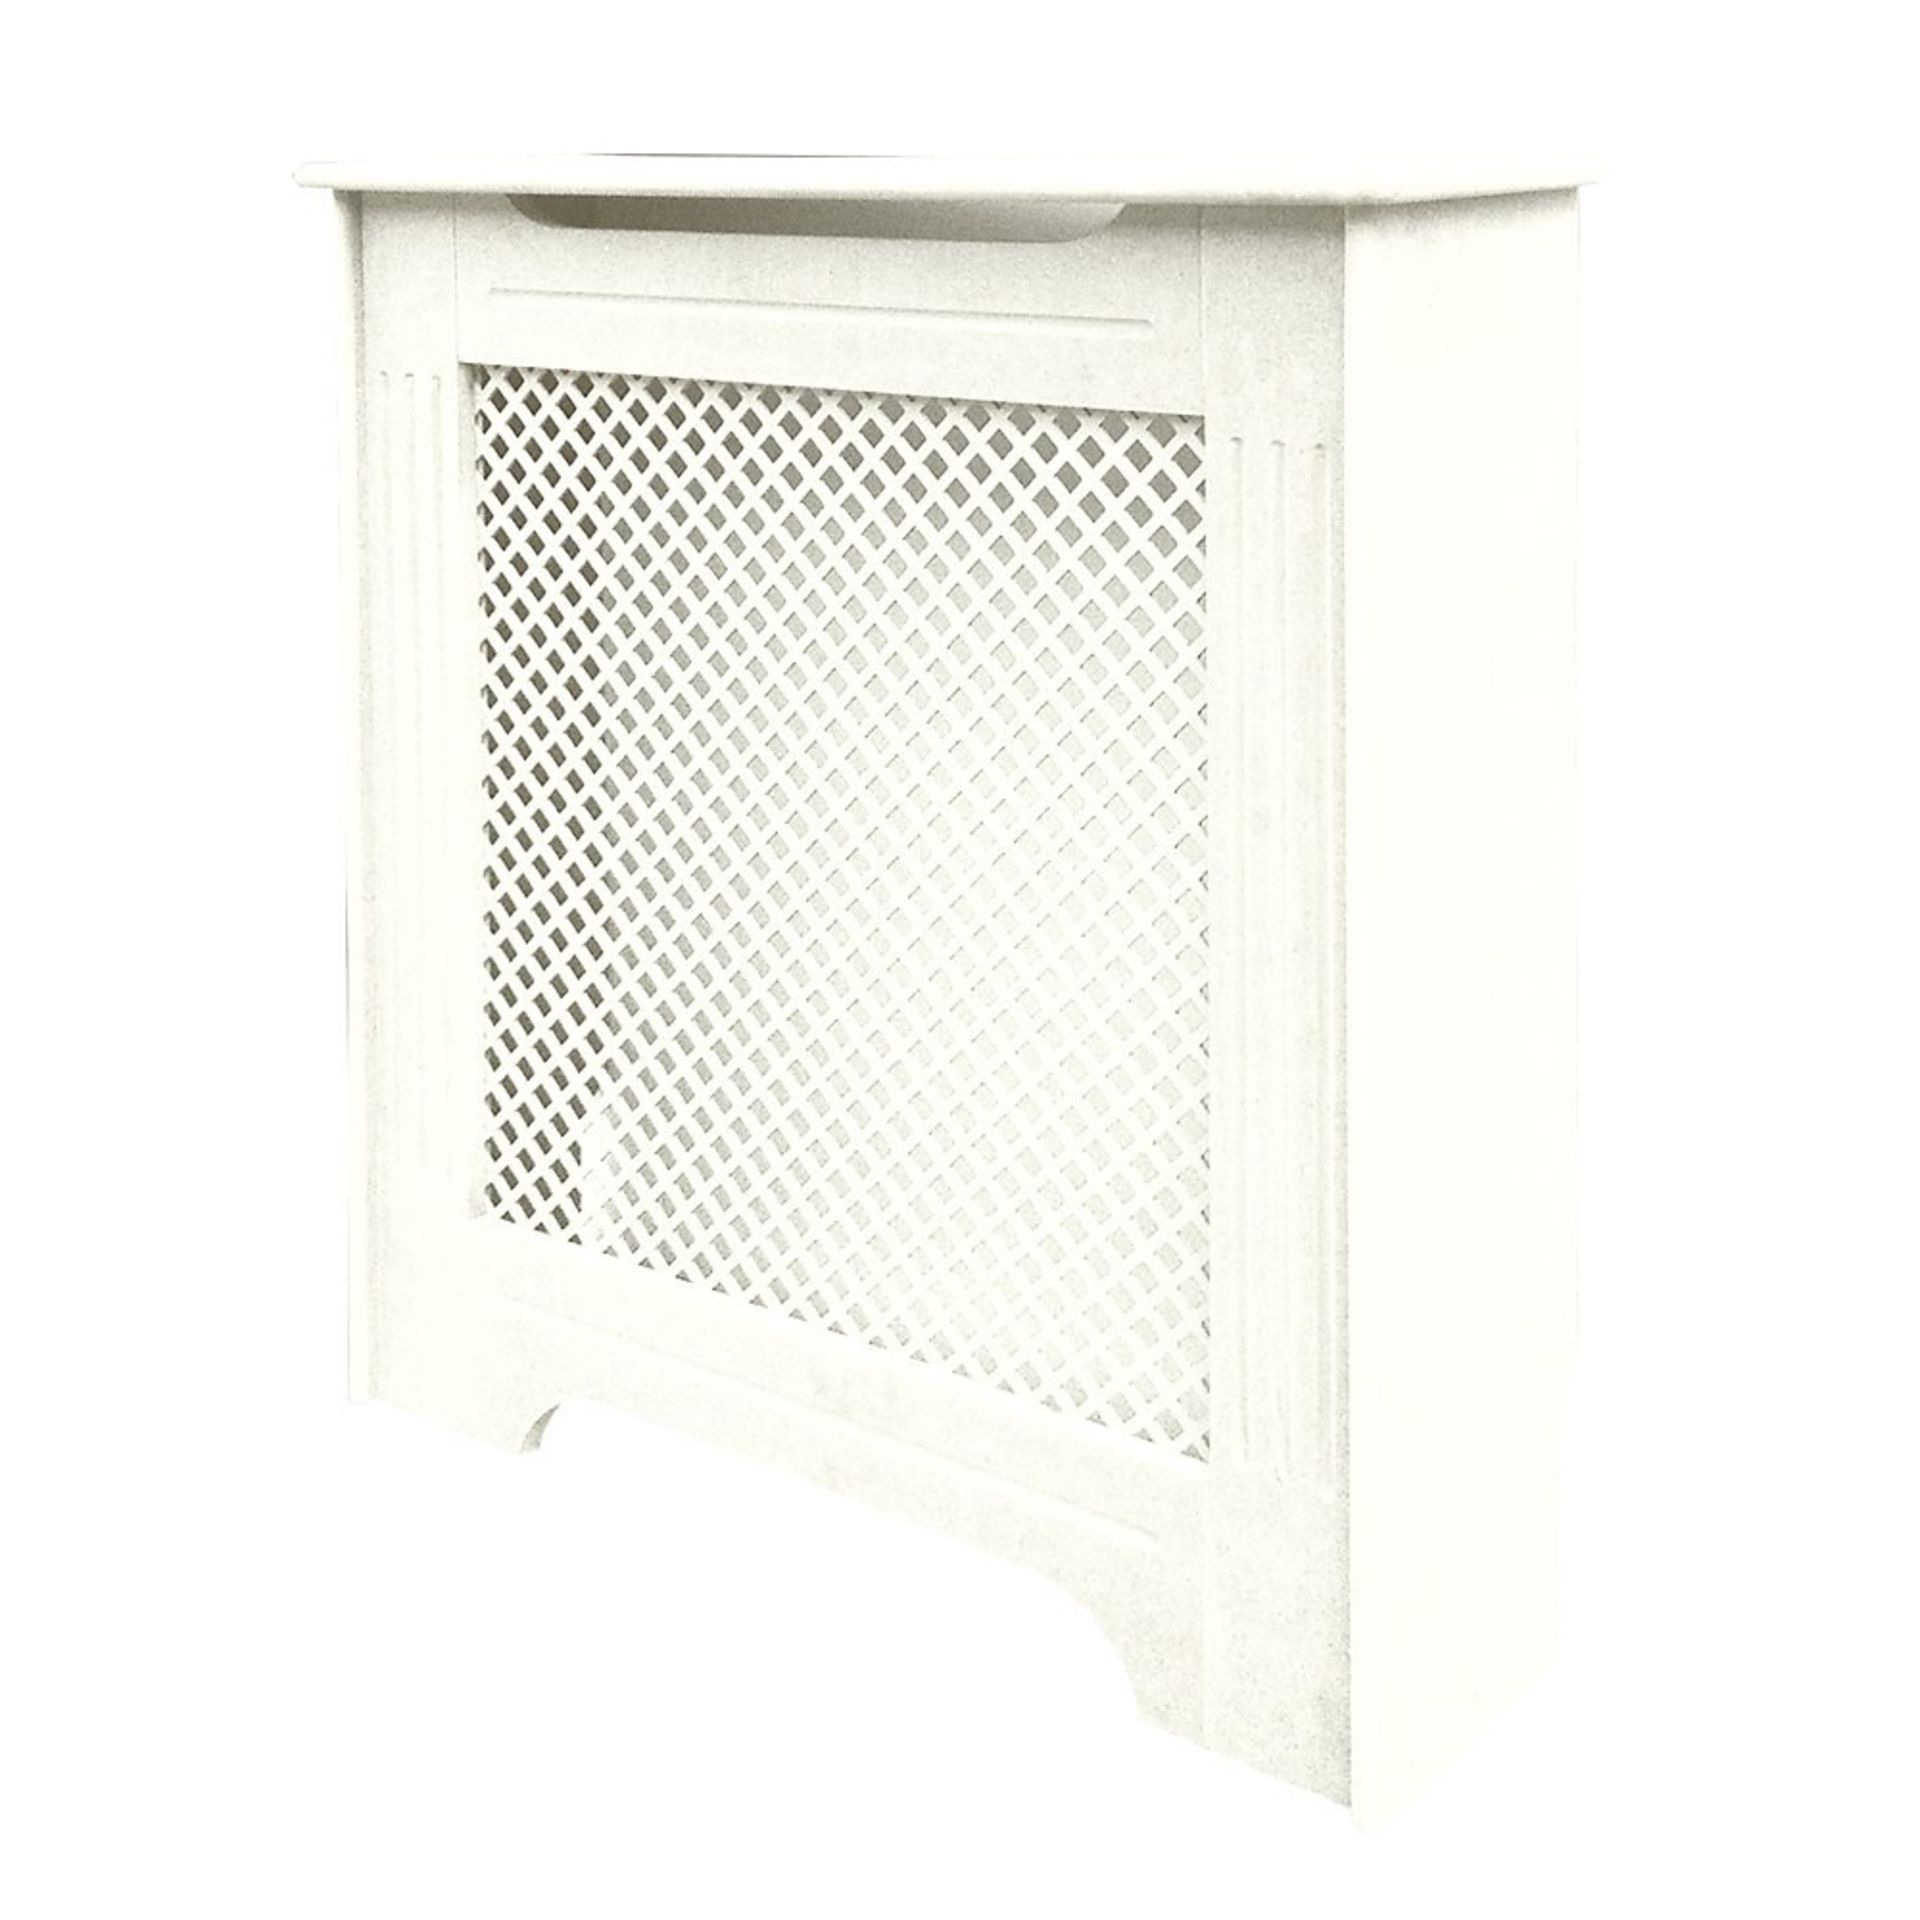 (UK242) 820 X 210 X 868MM VICTORIAN RADIATOR CABINET WHITE. White finish. Provides aSolution for - Image 2 of 2